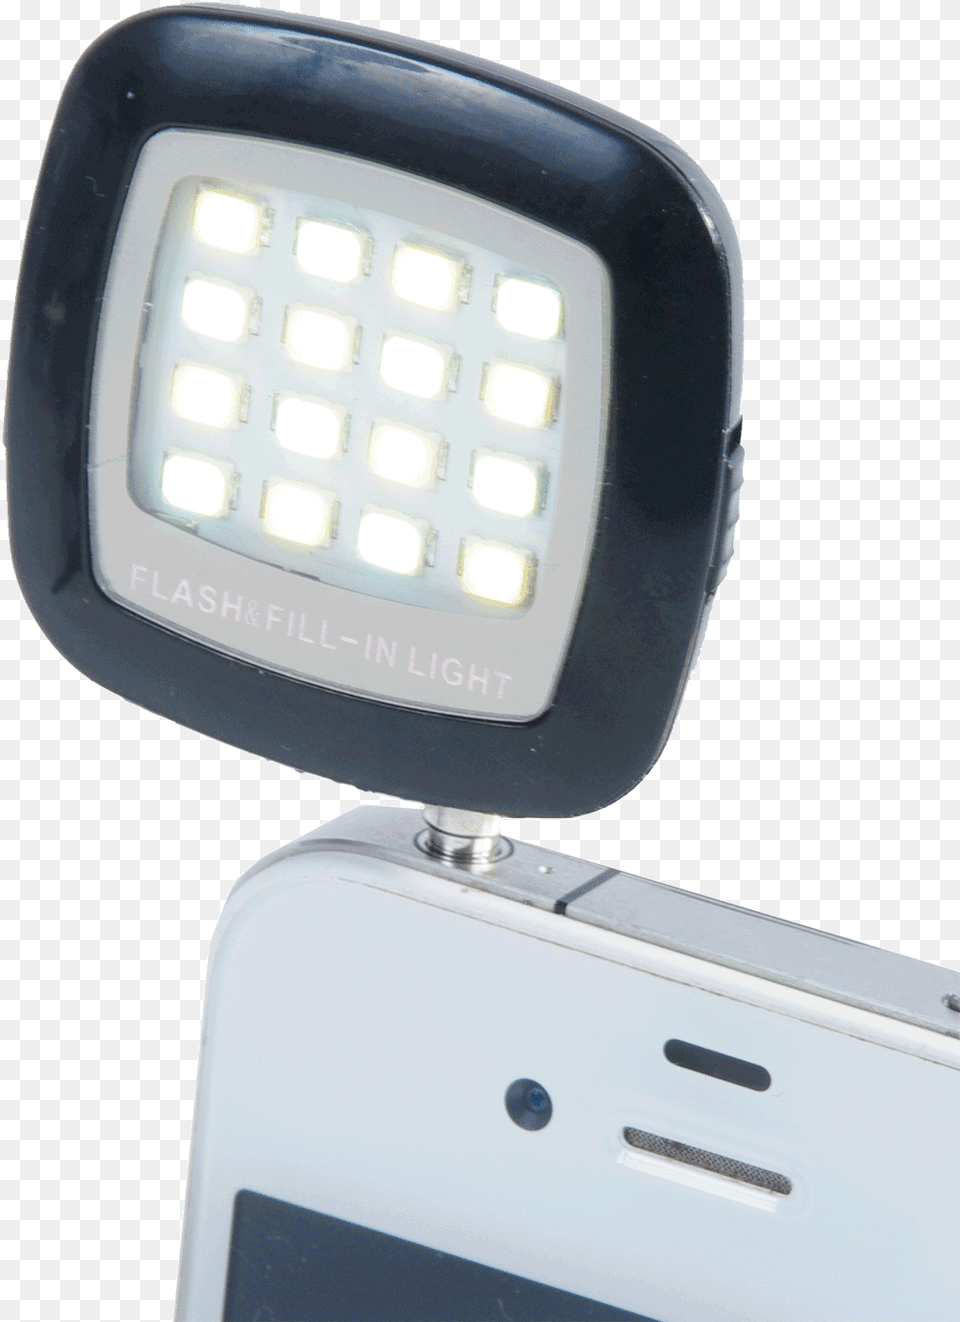 Led 16 Lightflash For Ios And Android Smartphones Iphone, Electronics, Mobile Phone, Phone, Car Free Png